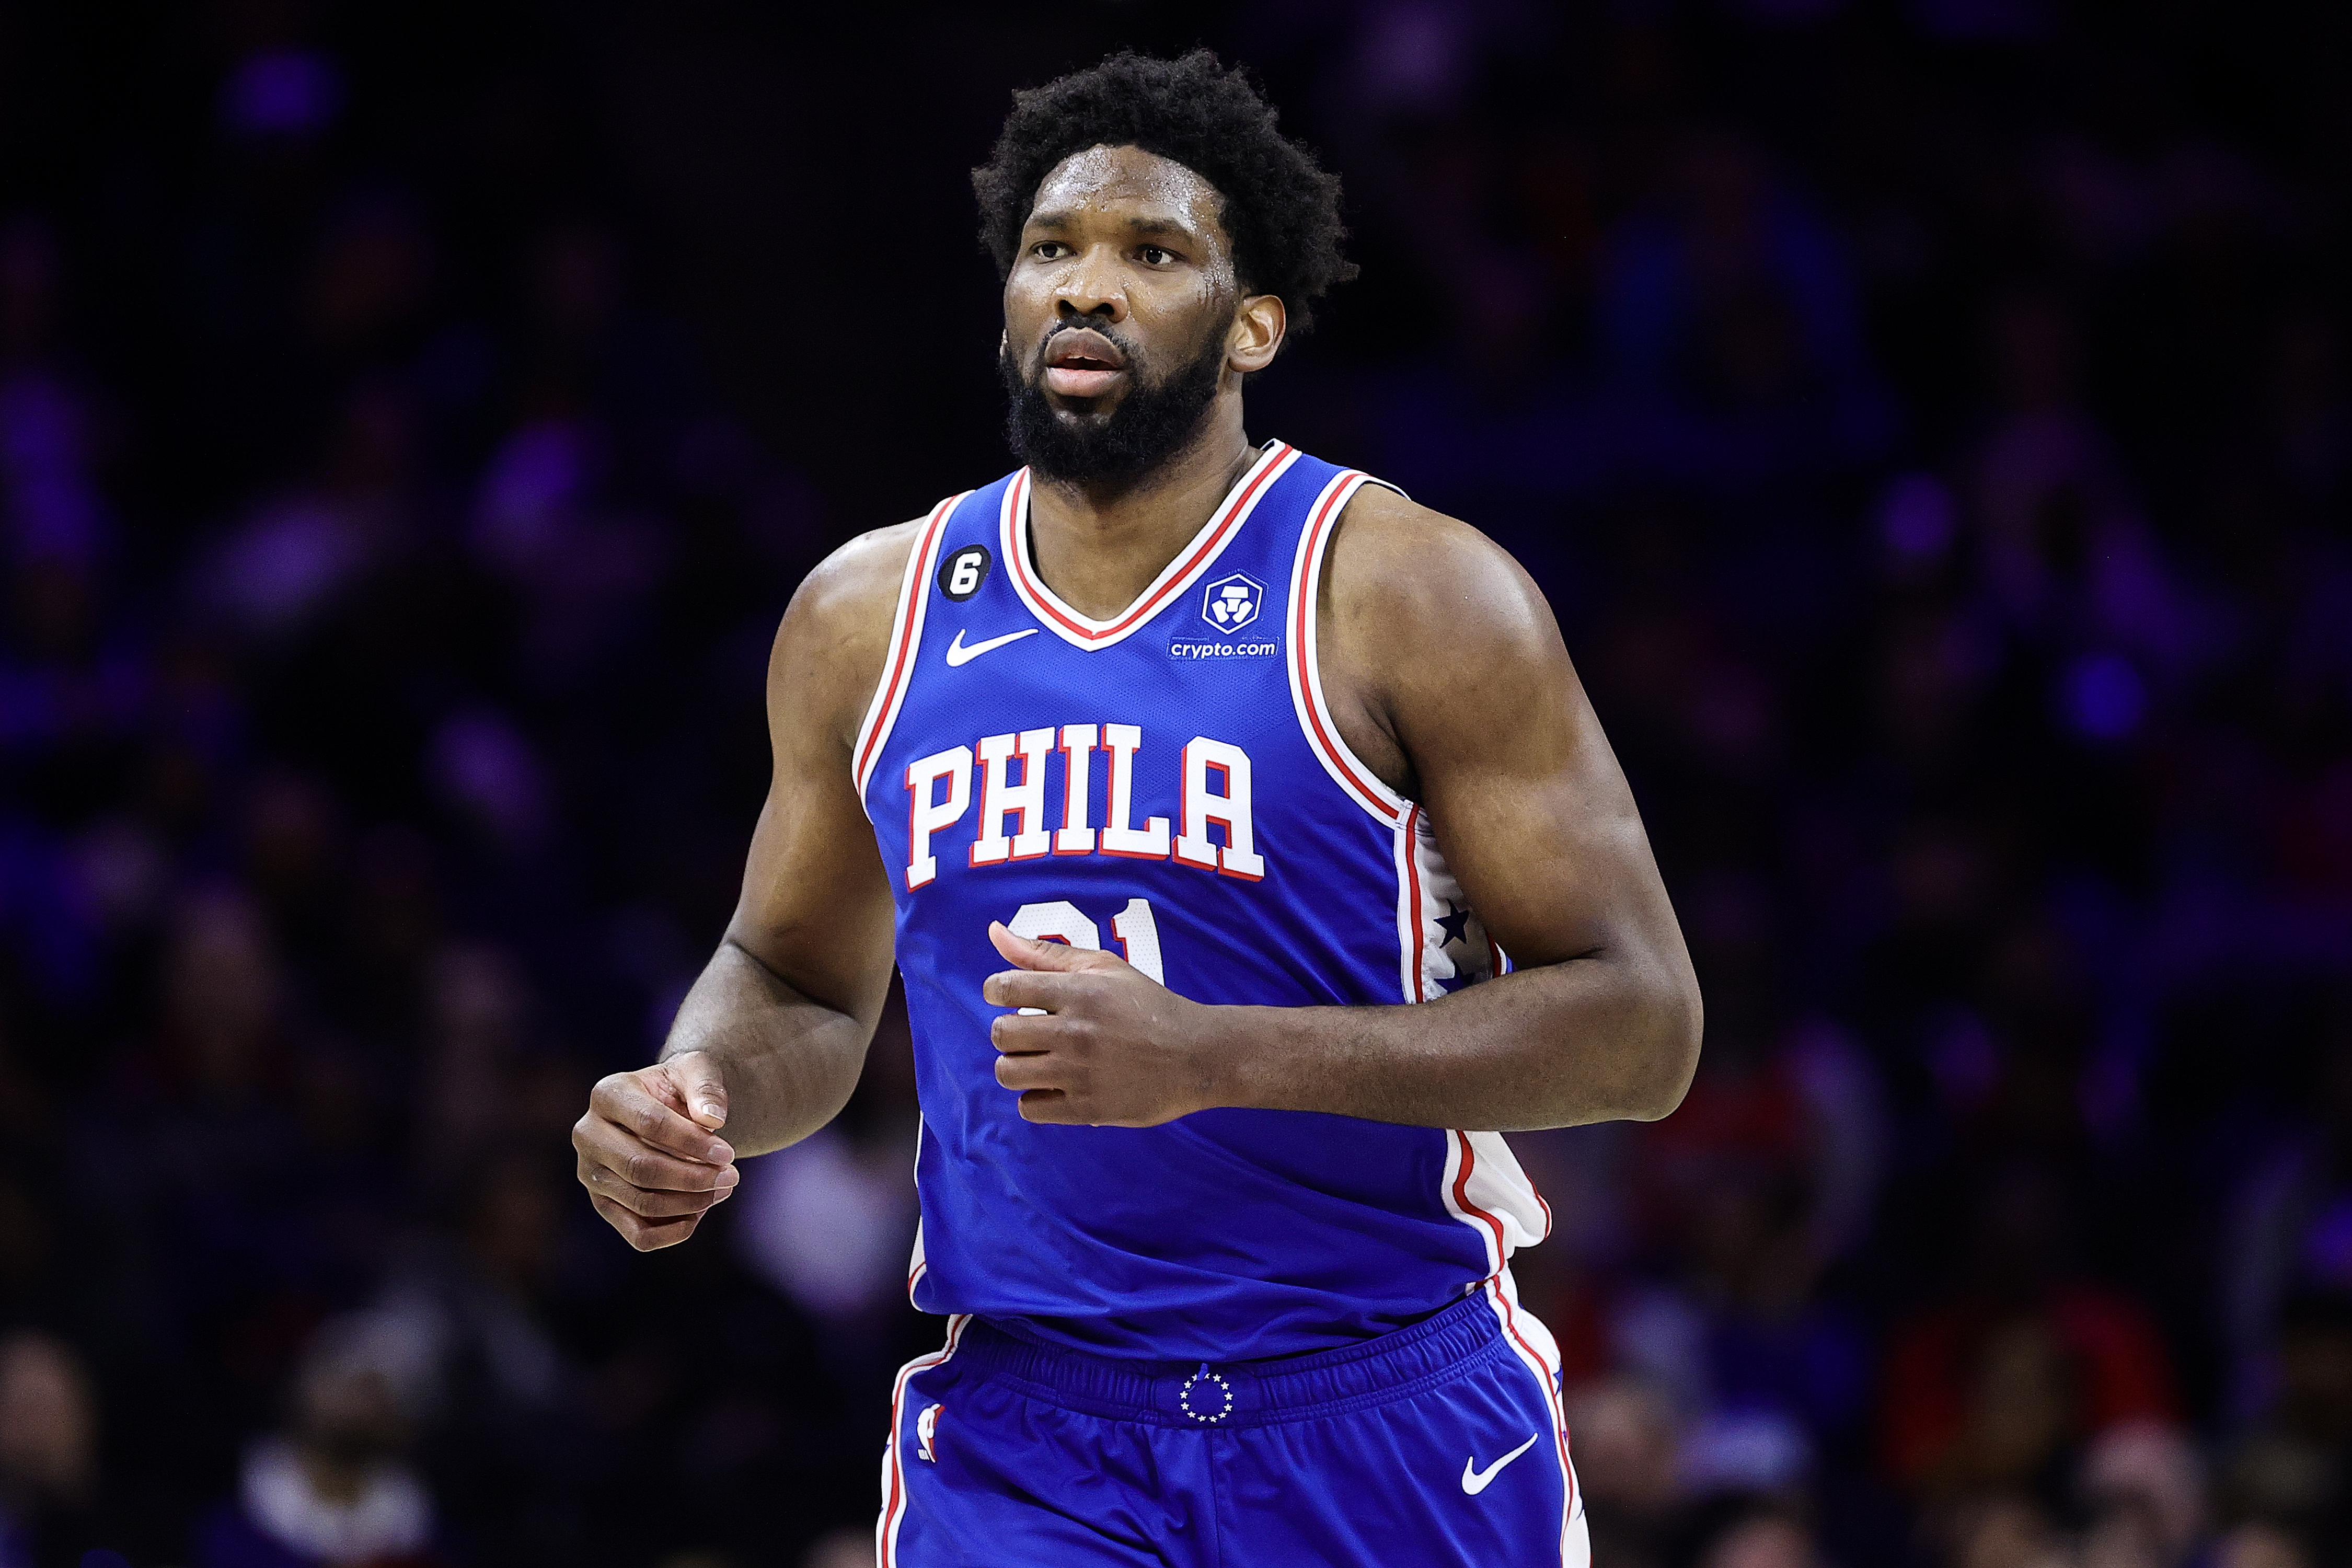 Get +375 Odds On This Joel Embiid & James Harden Parlay!